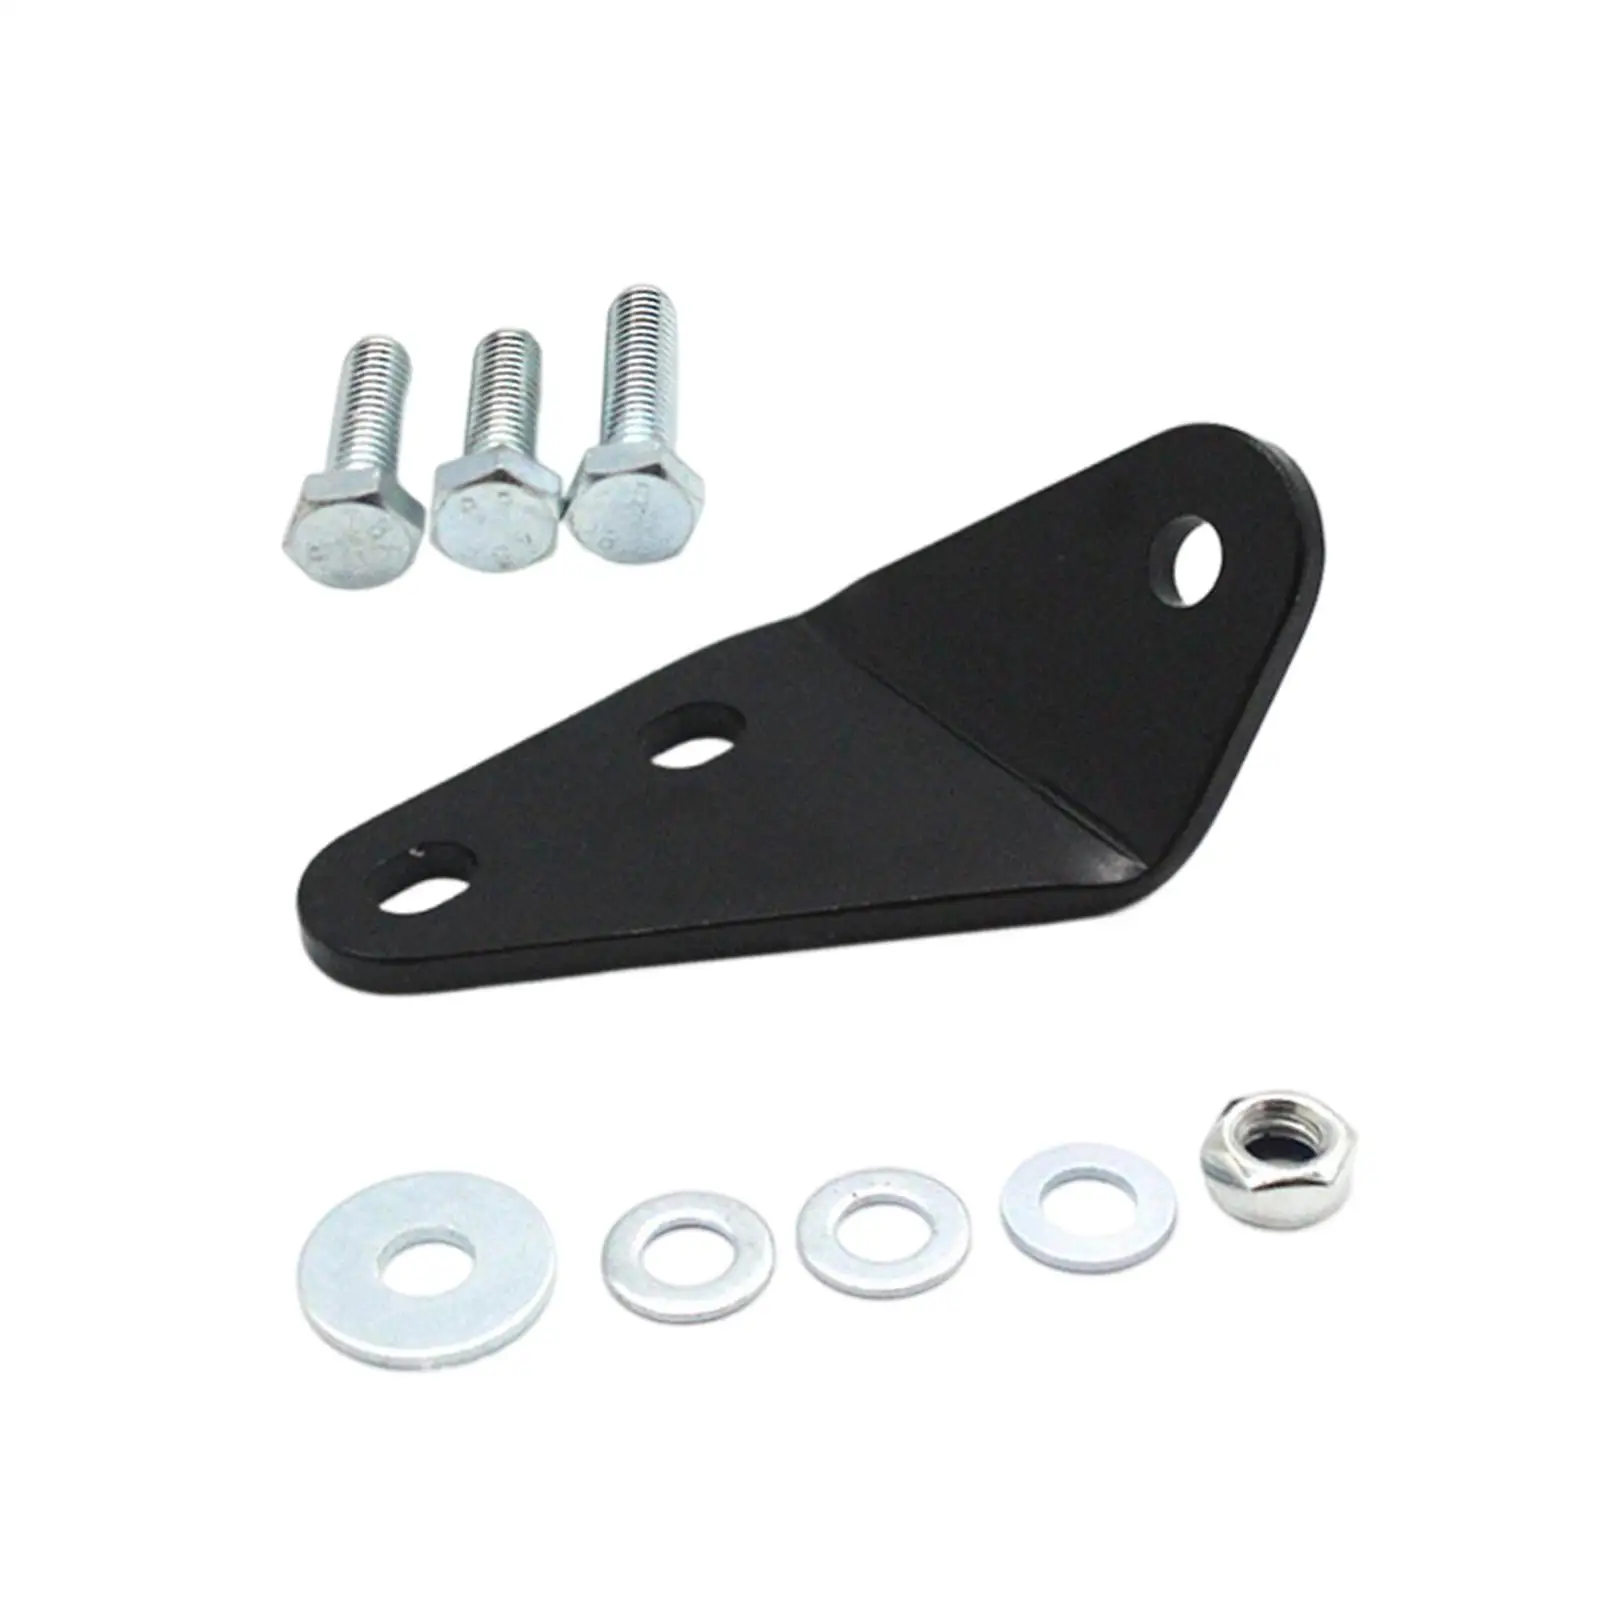 Clutch Pedal Repair Bracket Set Replace Metal High Performance Easy Installation